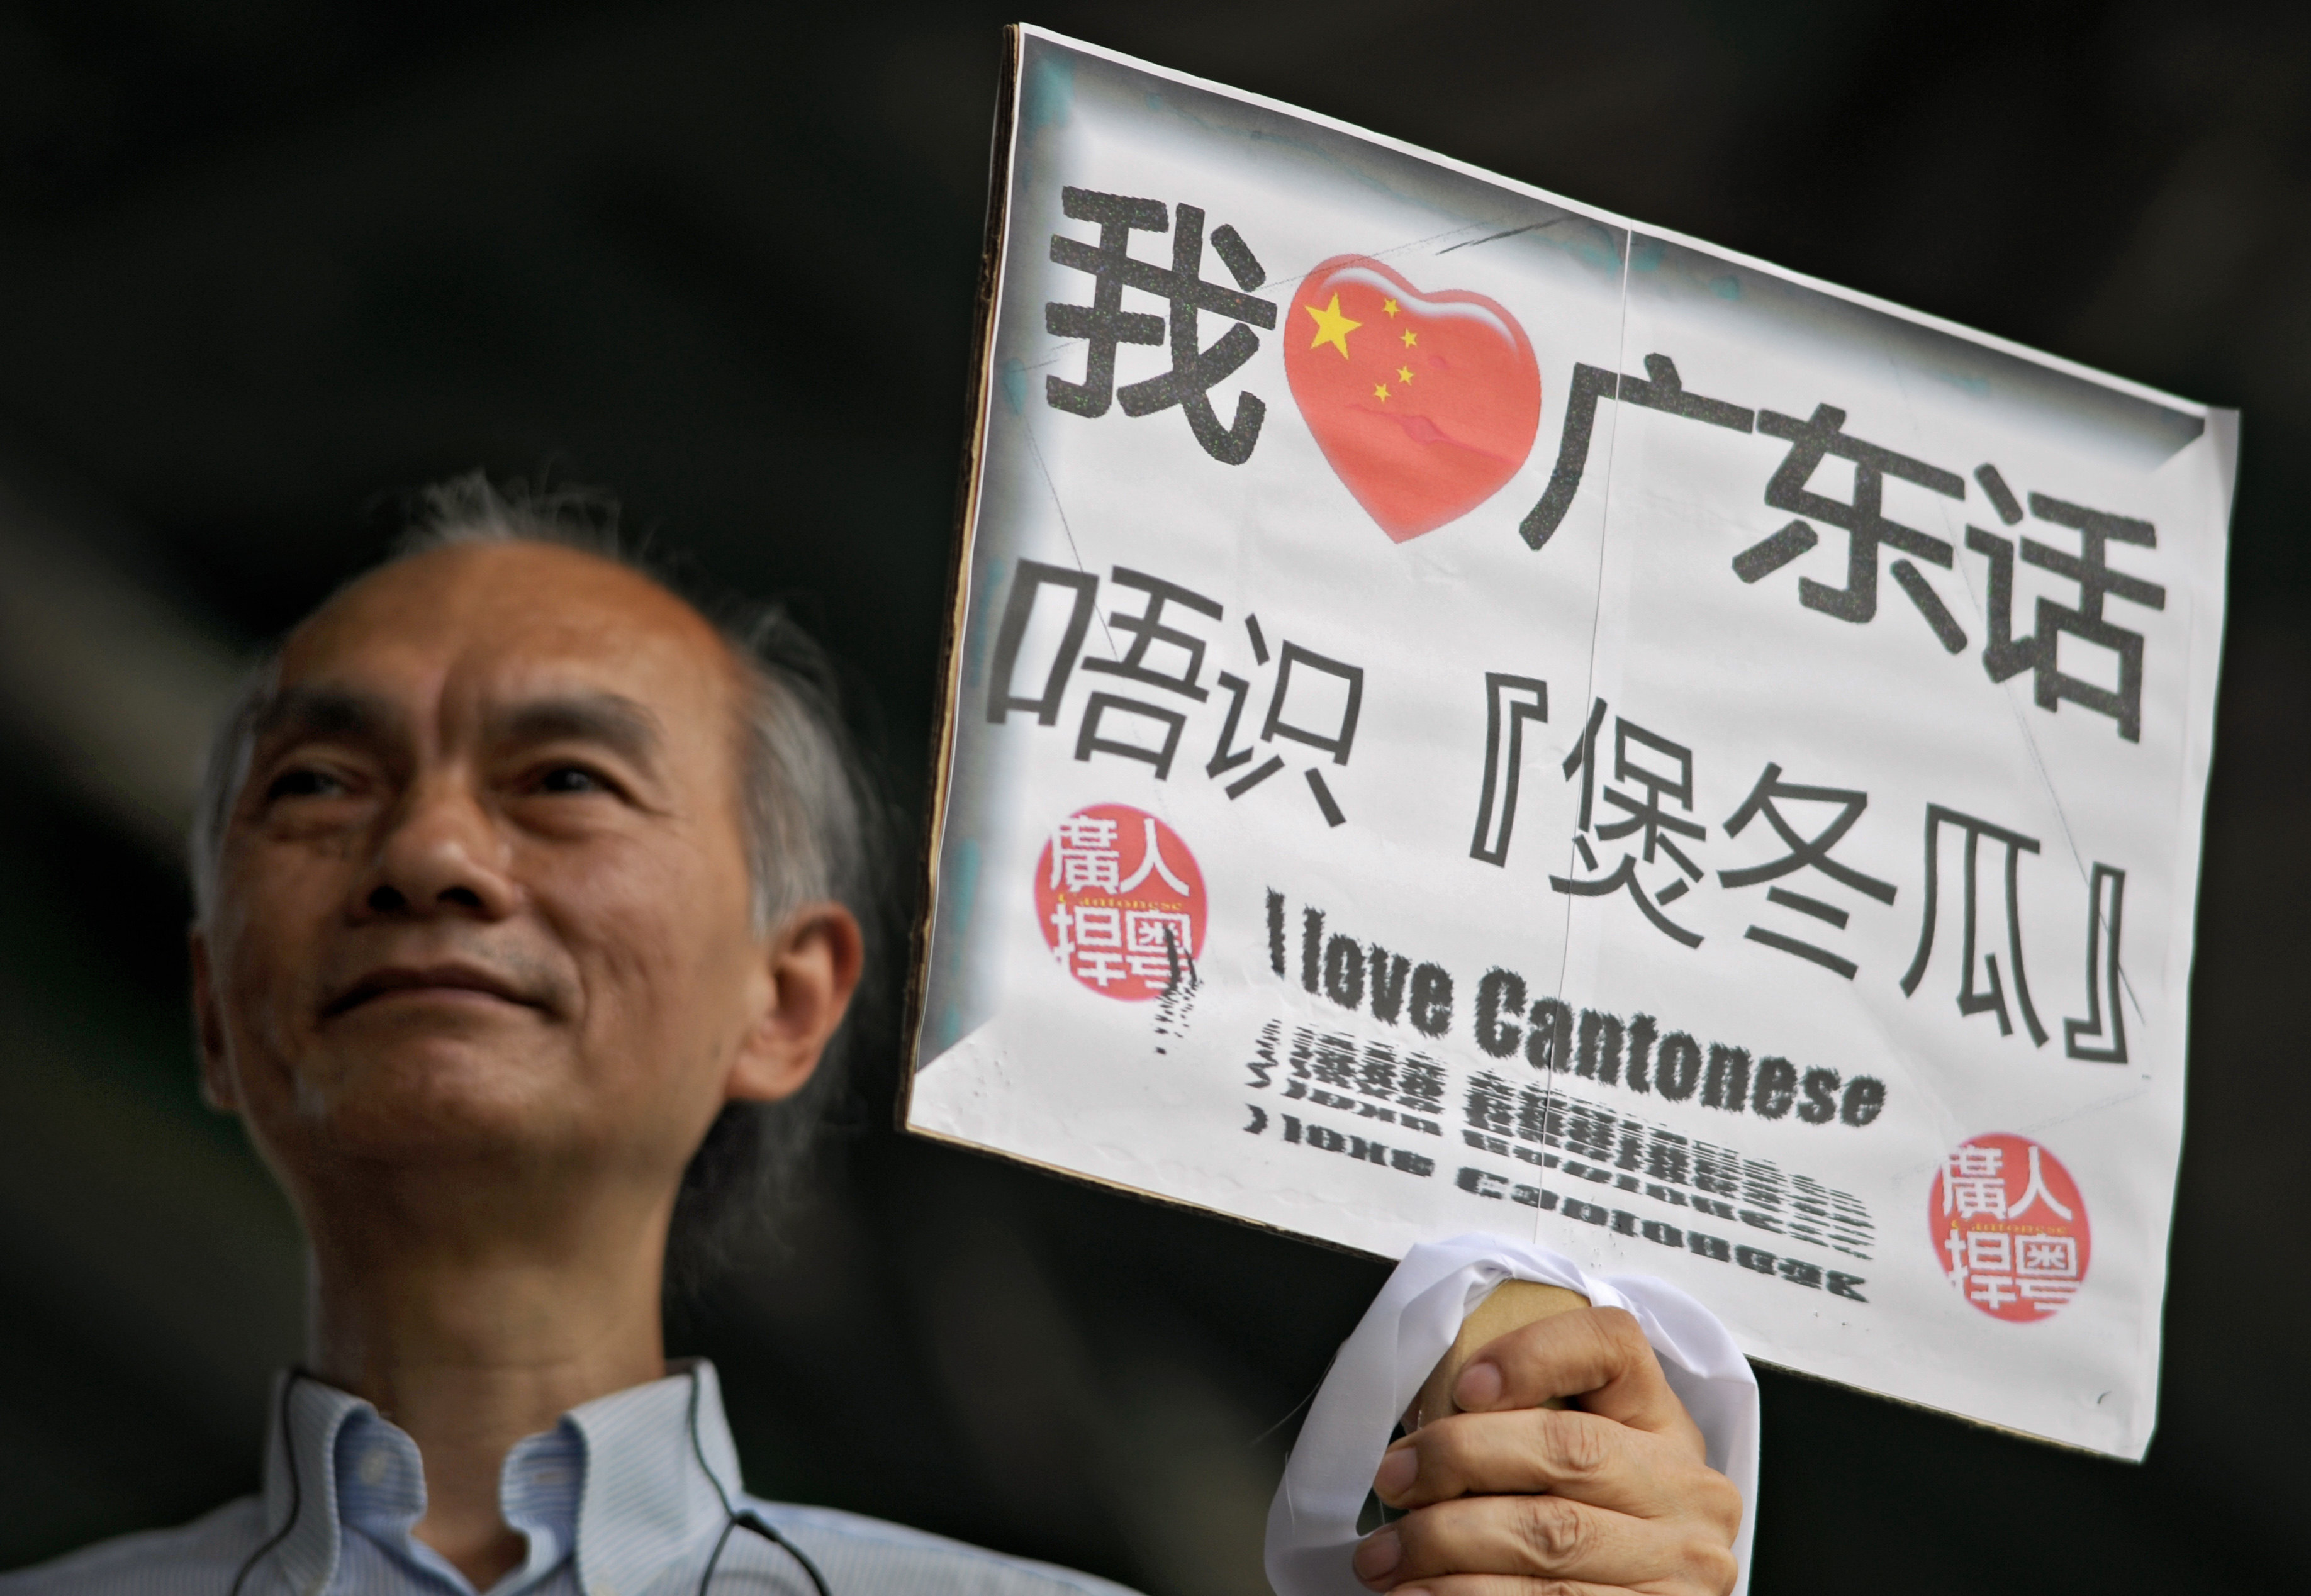 A man carries a sign saying: “I love Cantonese”. With more than 80 million speakers globally, it remains a vital and useful language. Photo: AFP